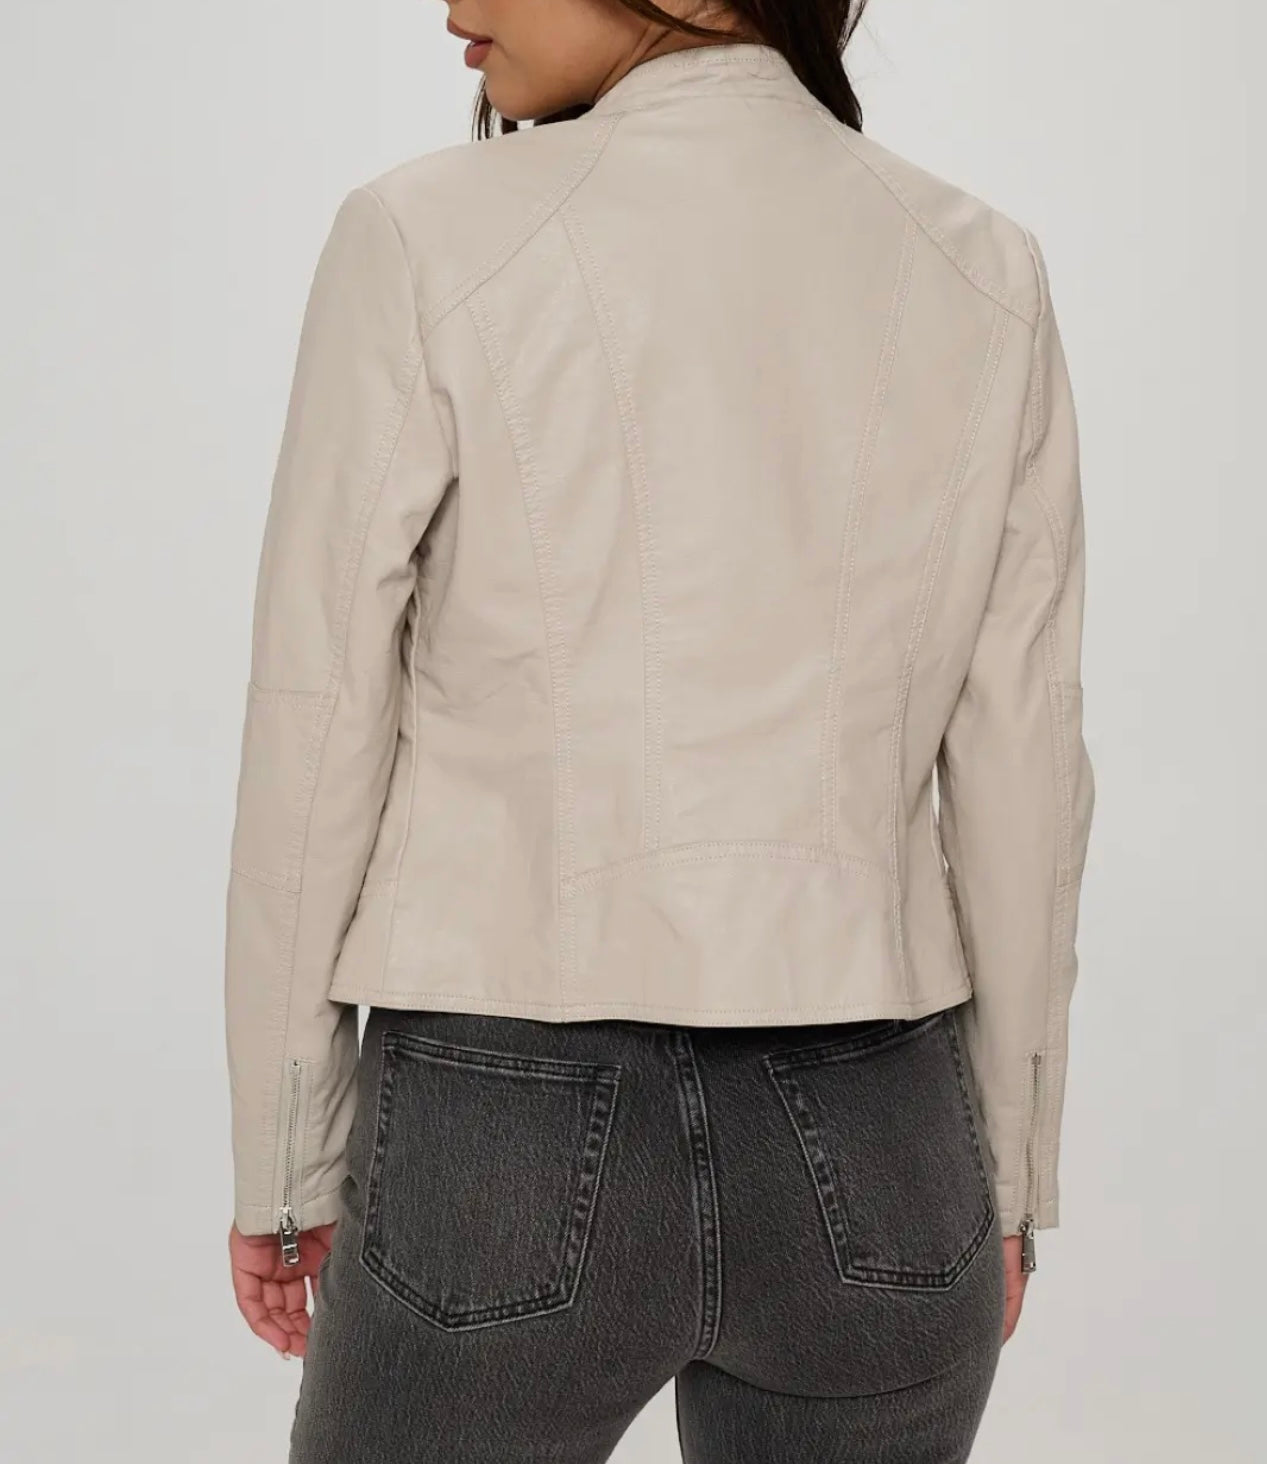 Classy Lady Cream Faux Leather Jacket